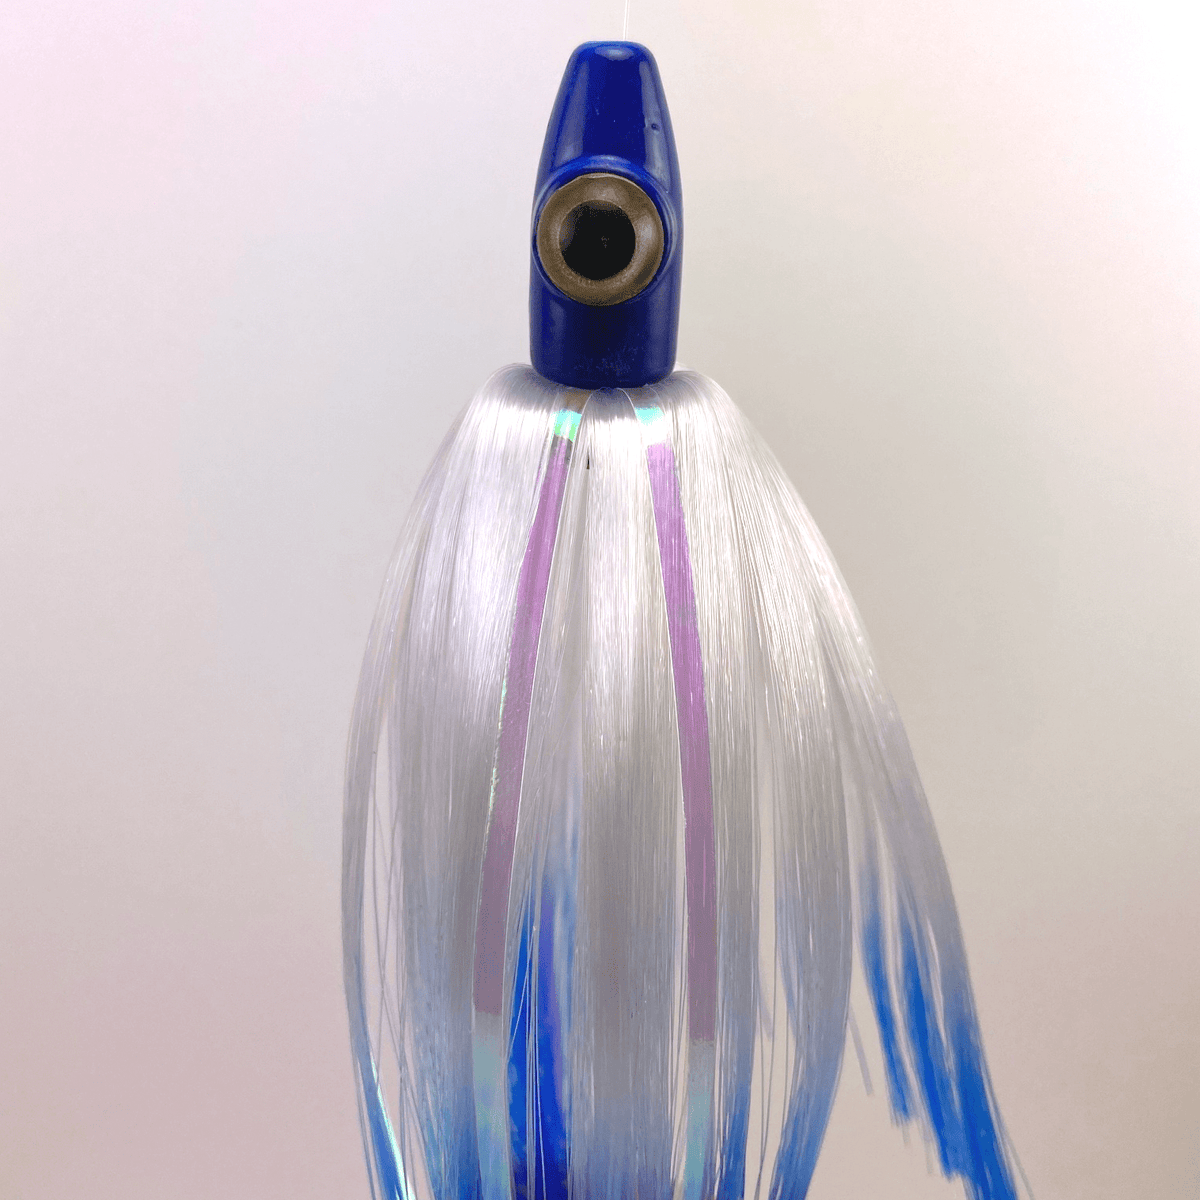 MagicTail Hoo Magic Trolling Lures 1oz / Blue Crystal/Blue Tips